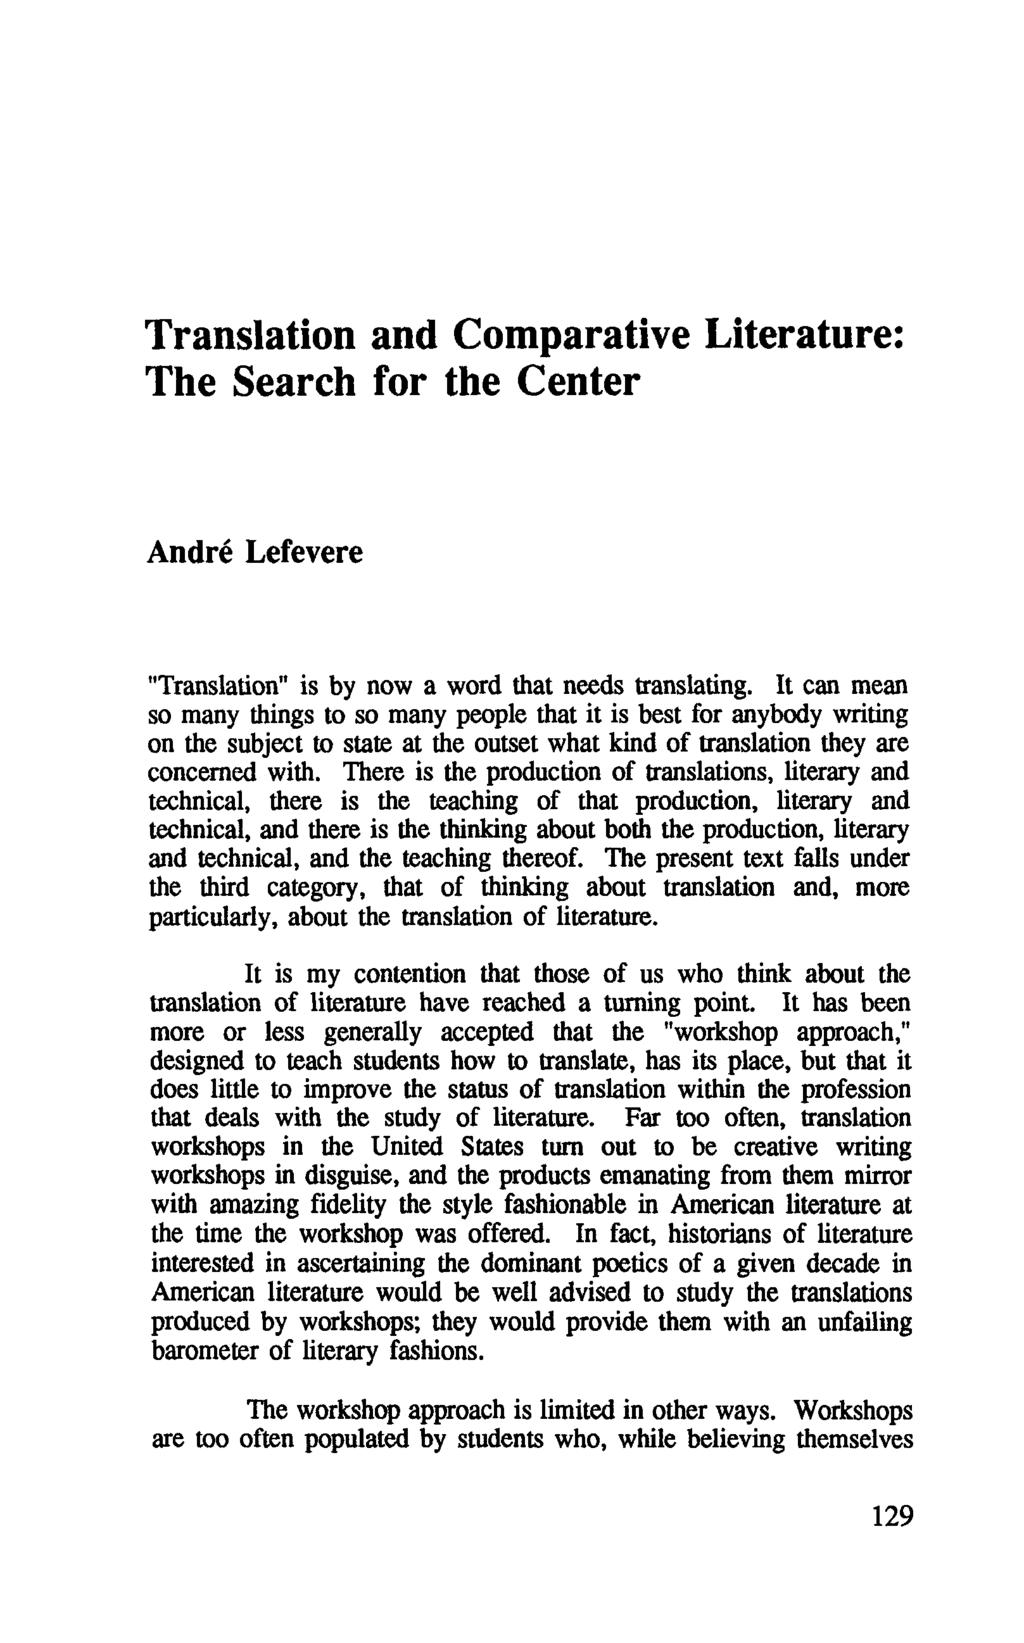 Translation and Comparative Literature: The Search for the Center André Lefevere "Translation" is by now a word that needs translating.